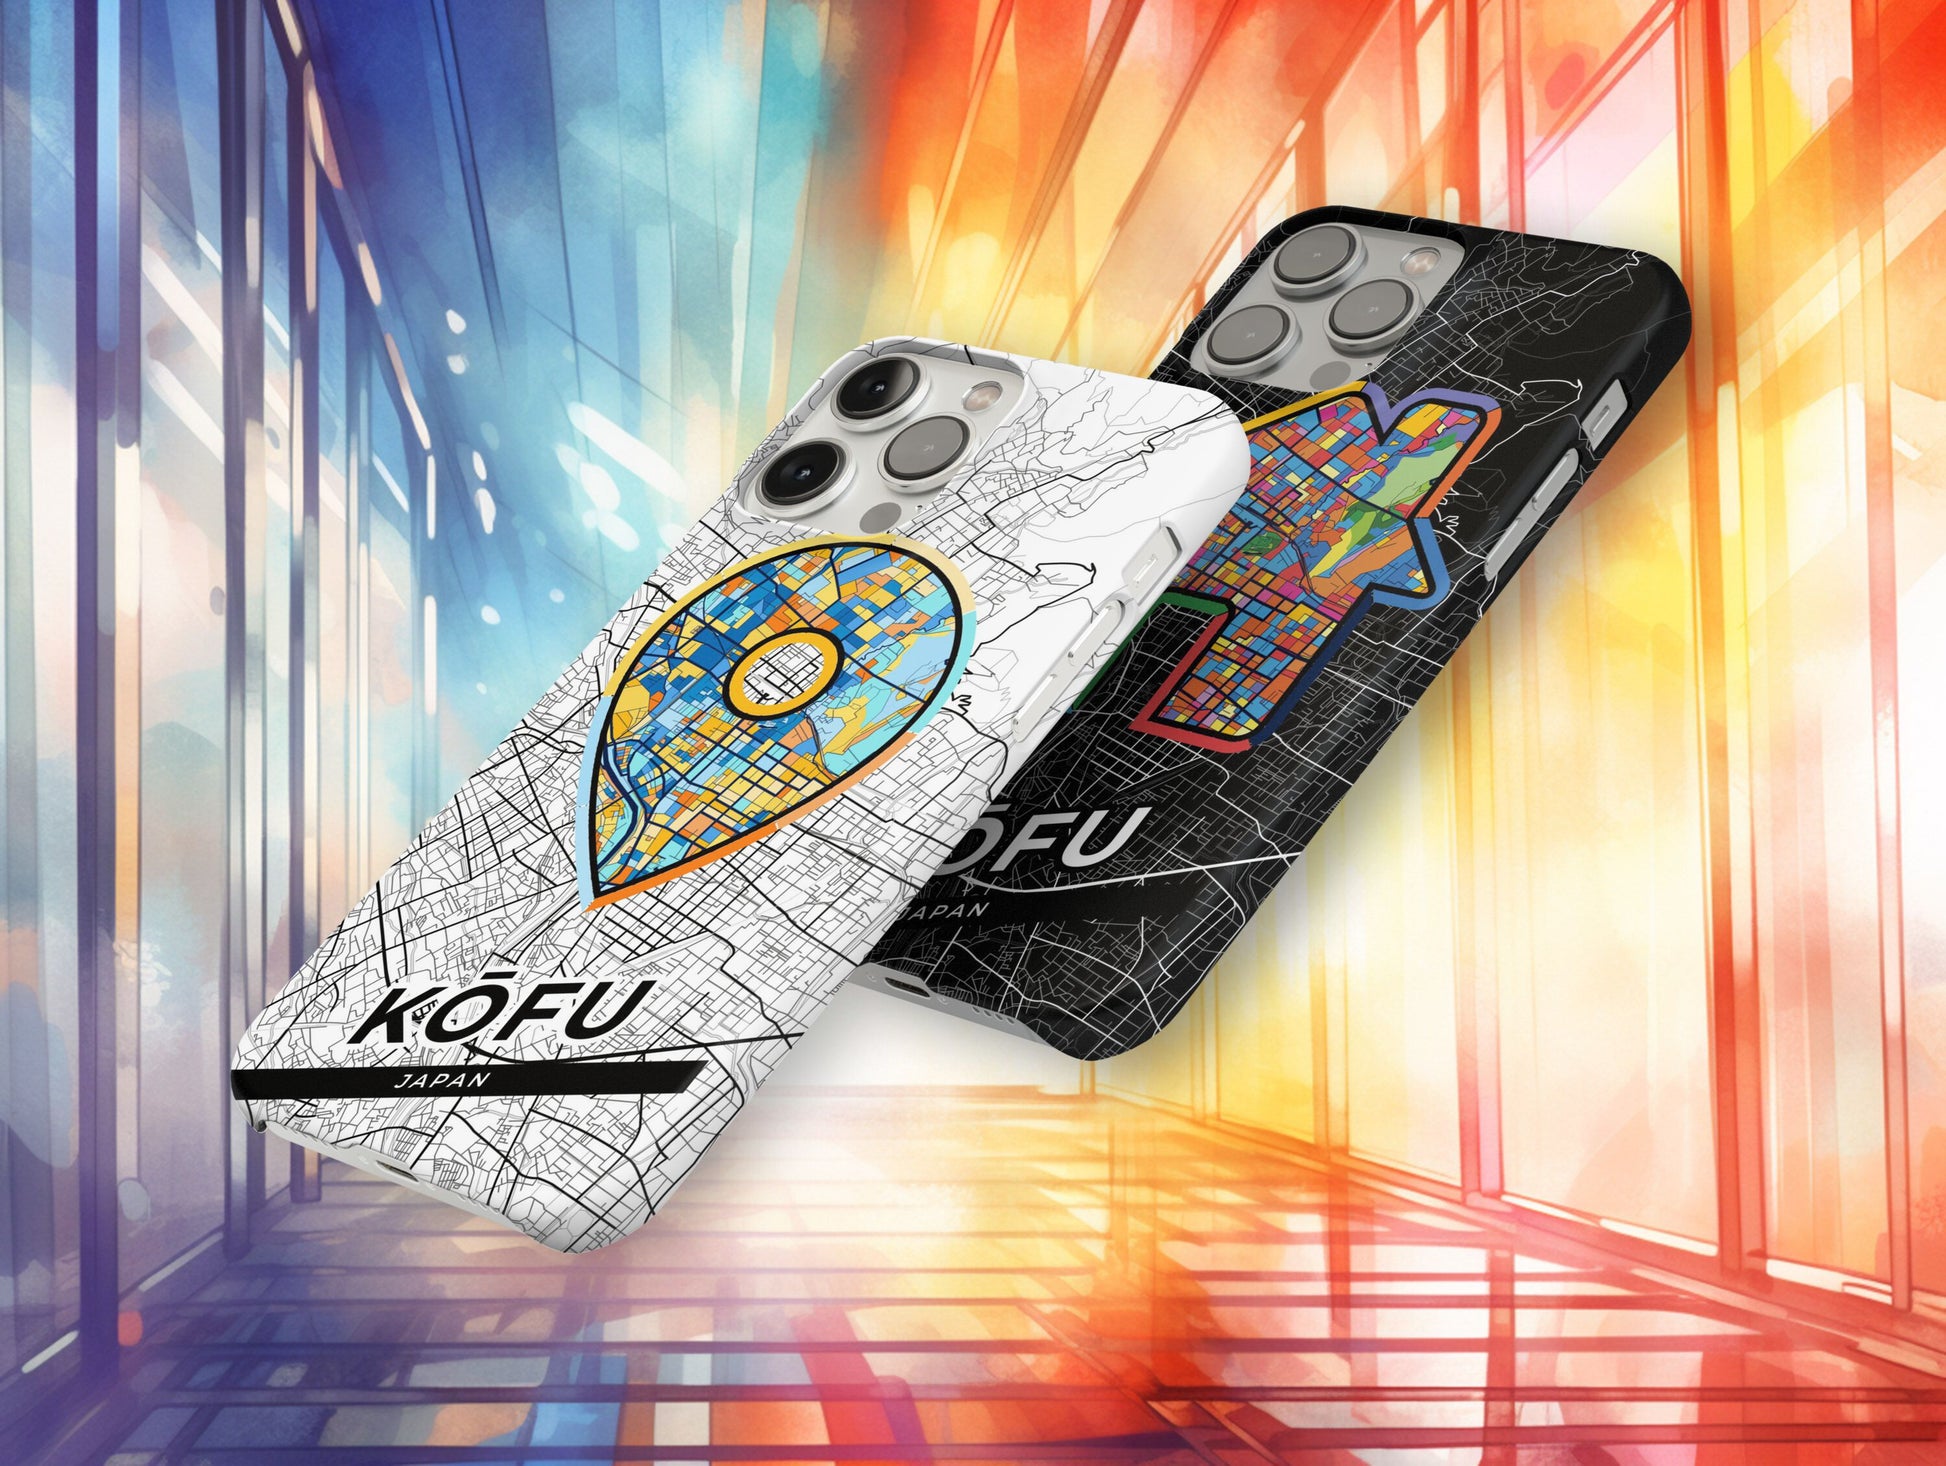 Kōfu Japan slim phone case with colorful icon. Birthday, wedding or housewarming gift. Couple match cases.